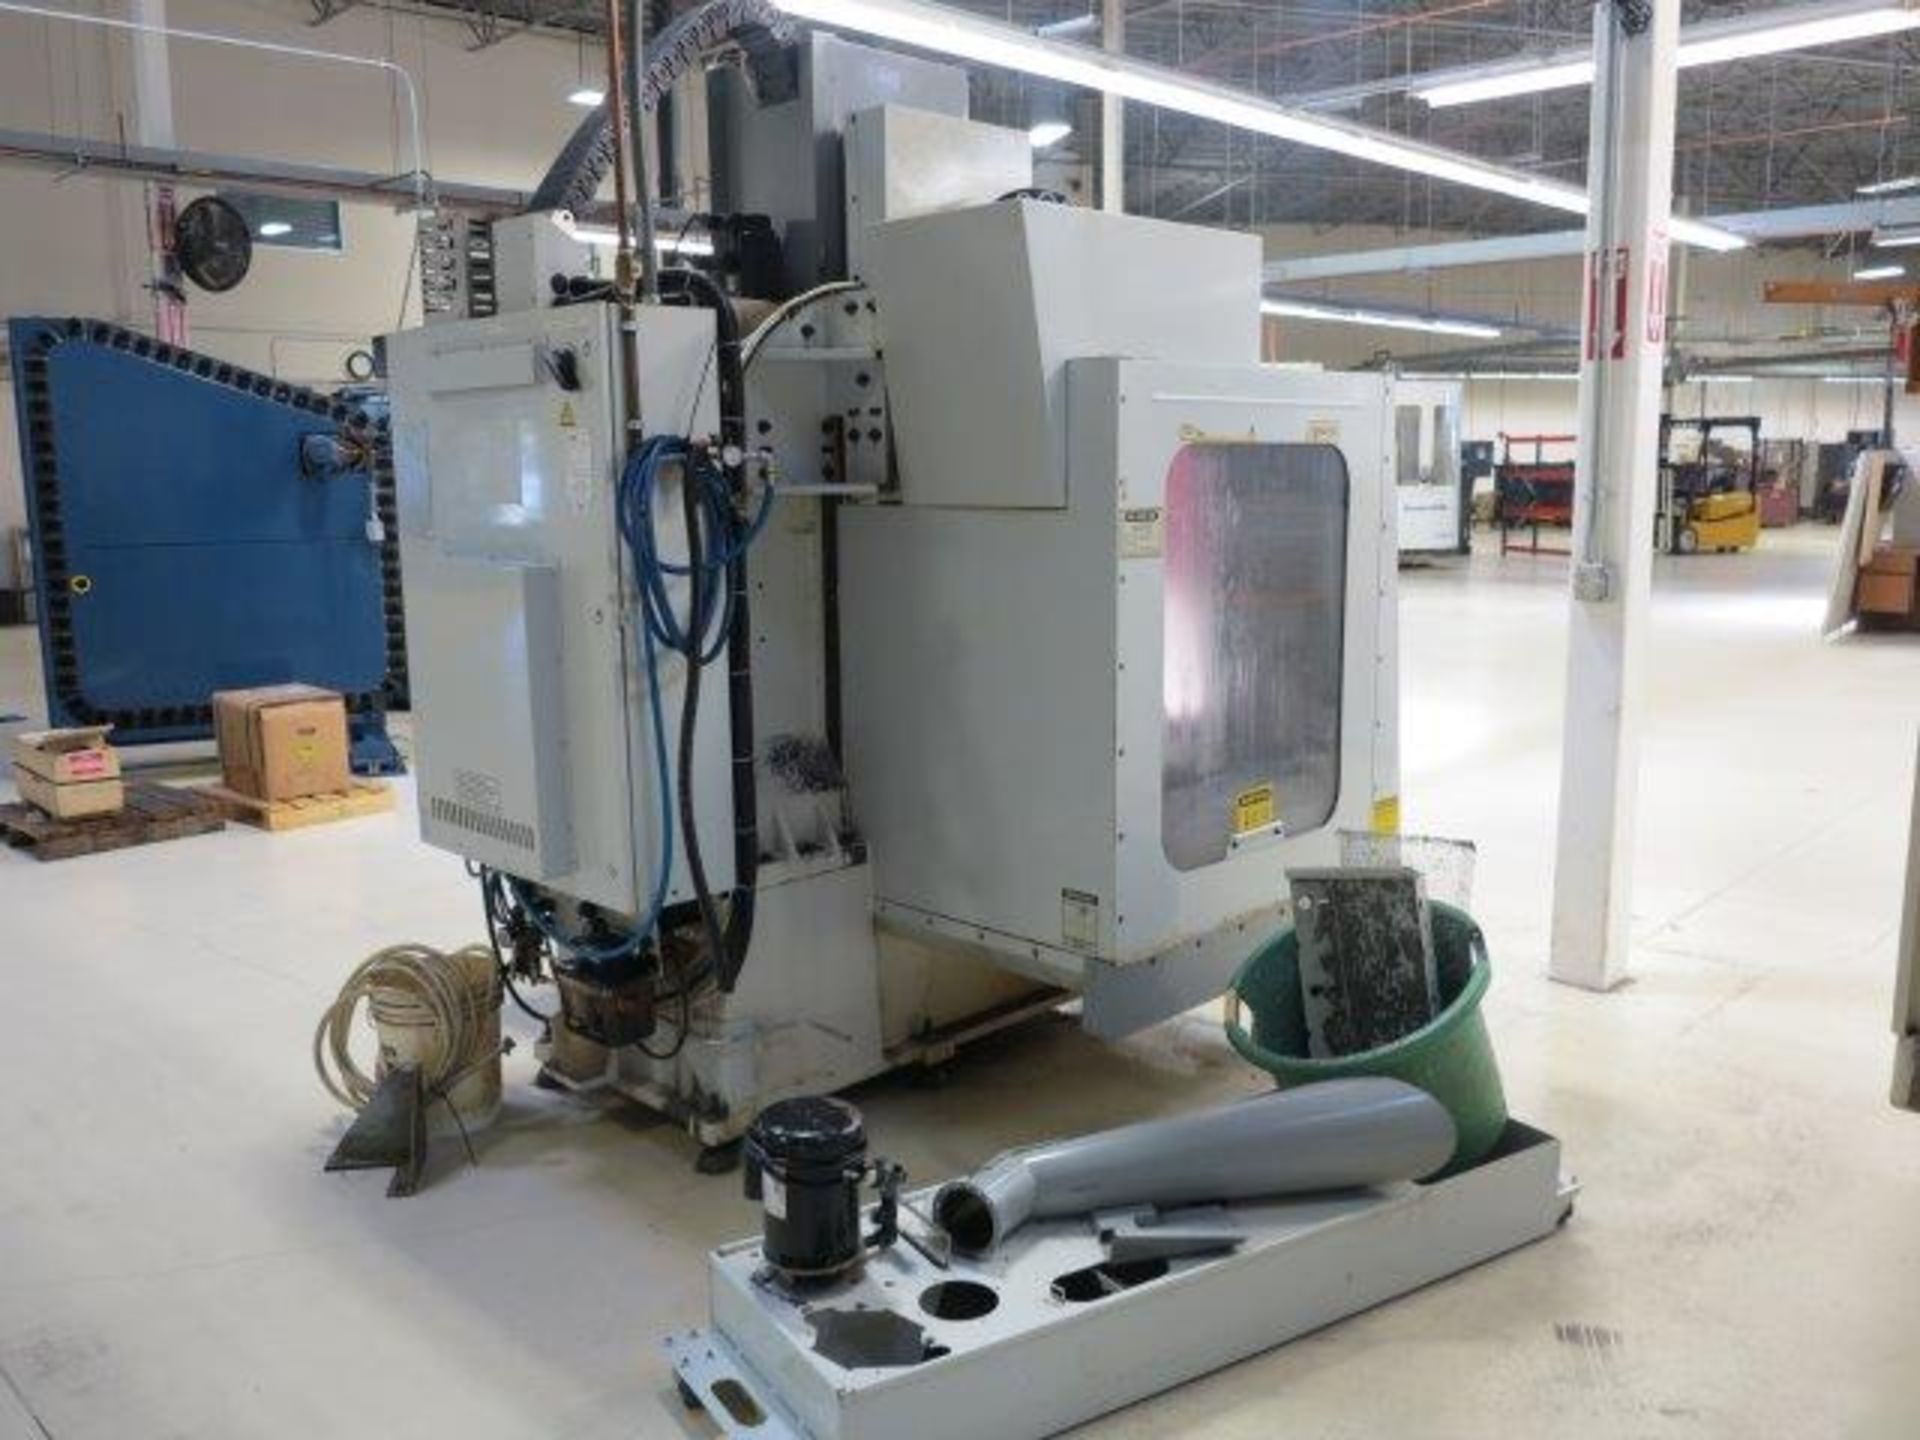 2001 HAAS VF-2, TRAVELS: 30" X 16" X 20", 7500 RPM SPINDLE, CAT 40 TAPER, 20 STATION ATC, 15 HP, - Image 4 of 6